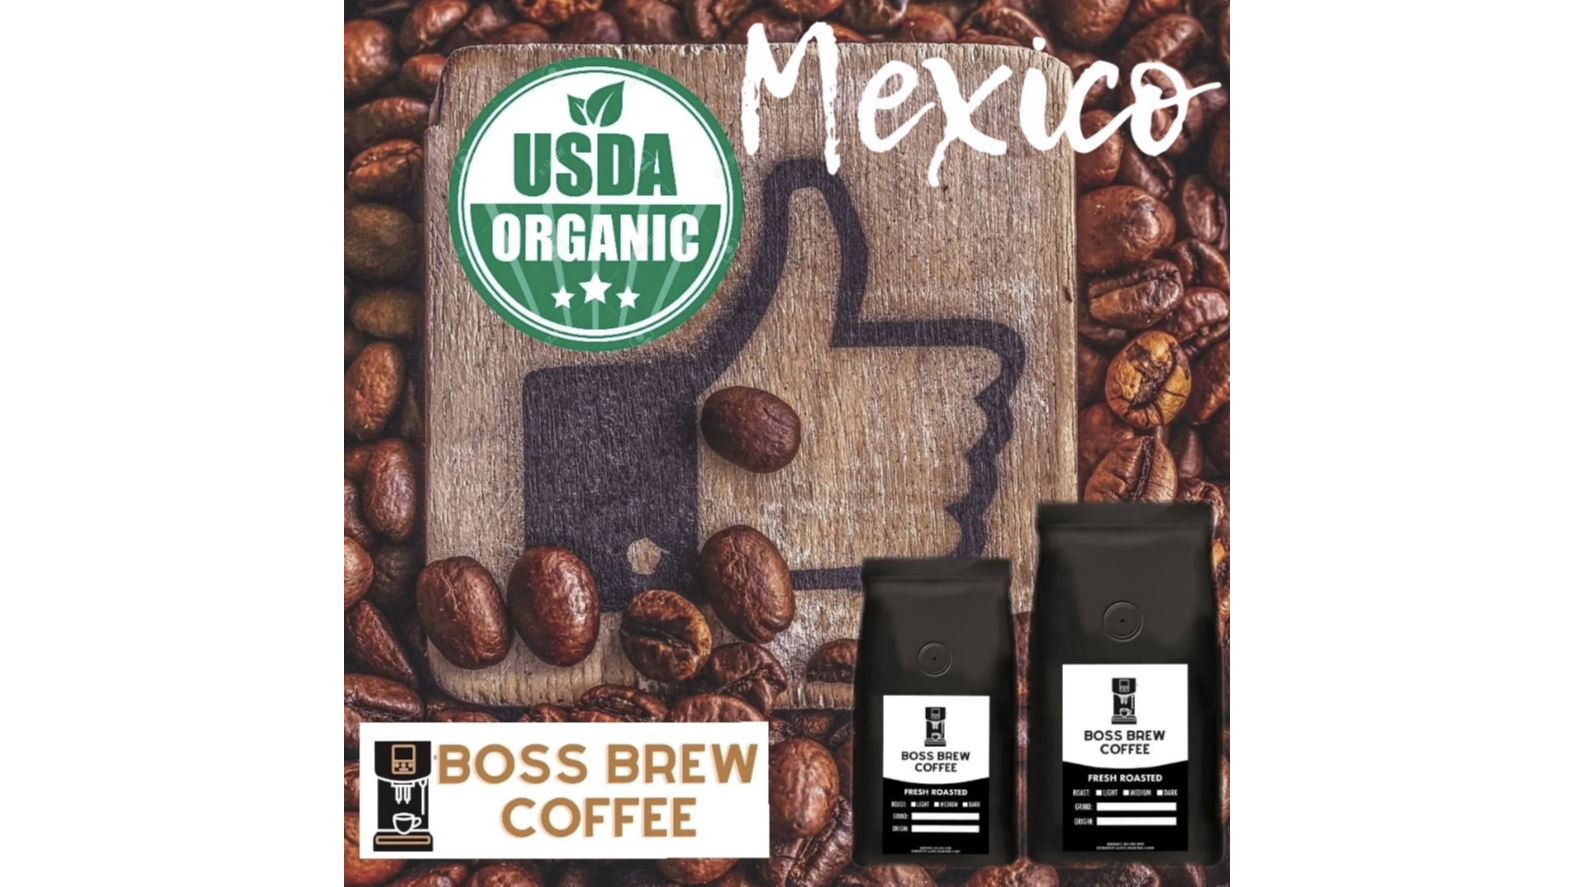 Medium Roast Mexico Coffee With Mundo Novo & Caturra Beans Is Roasted To Order